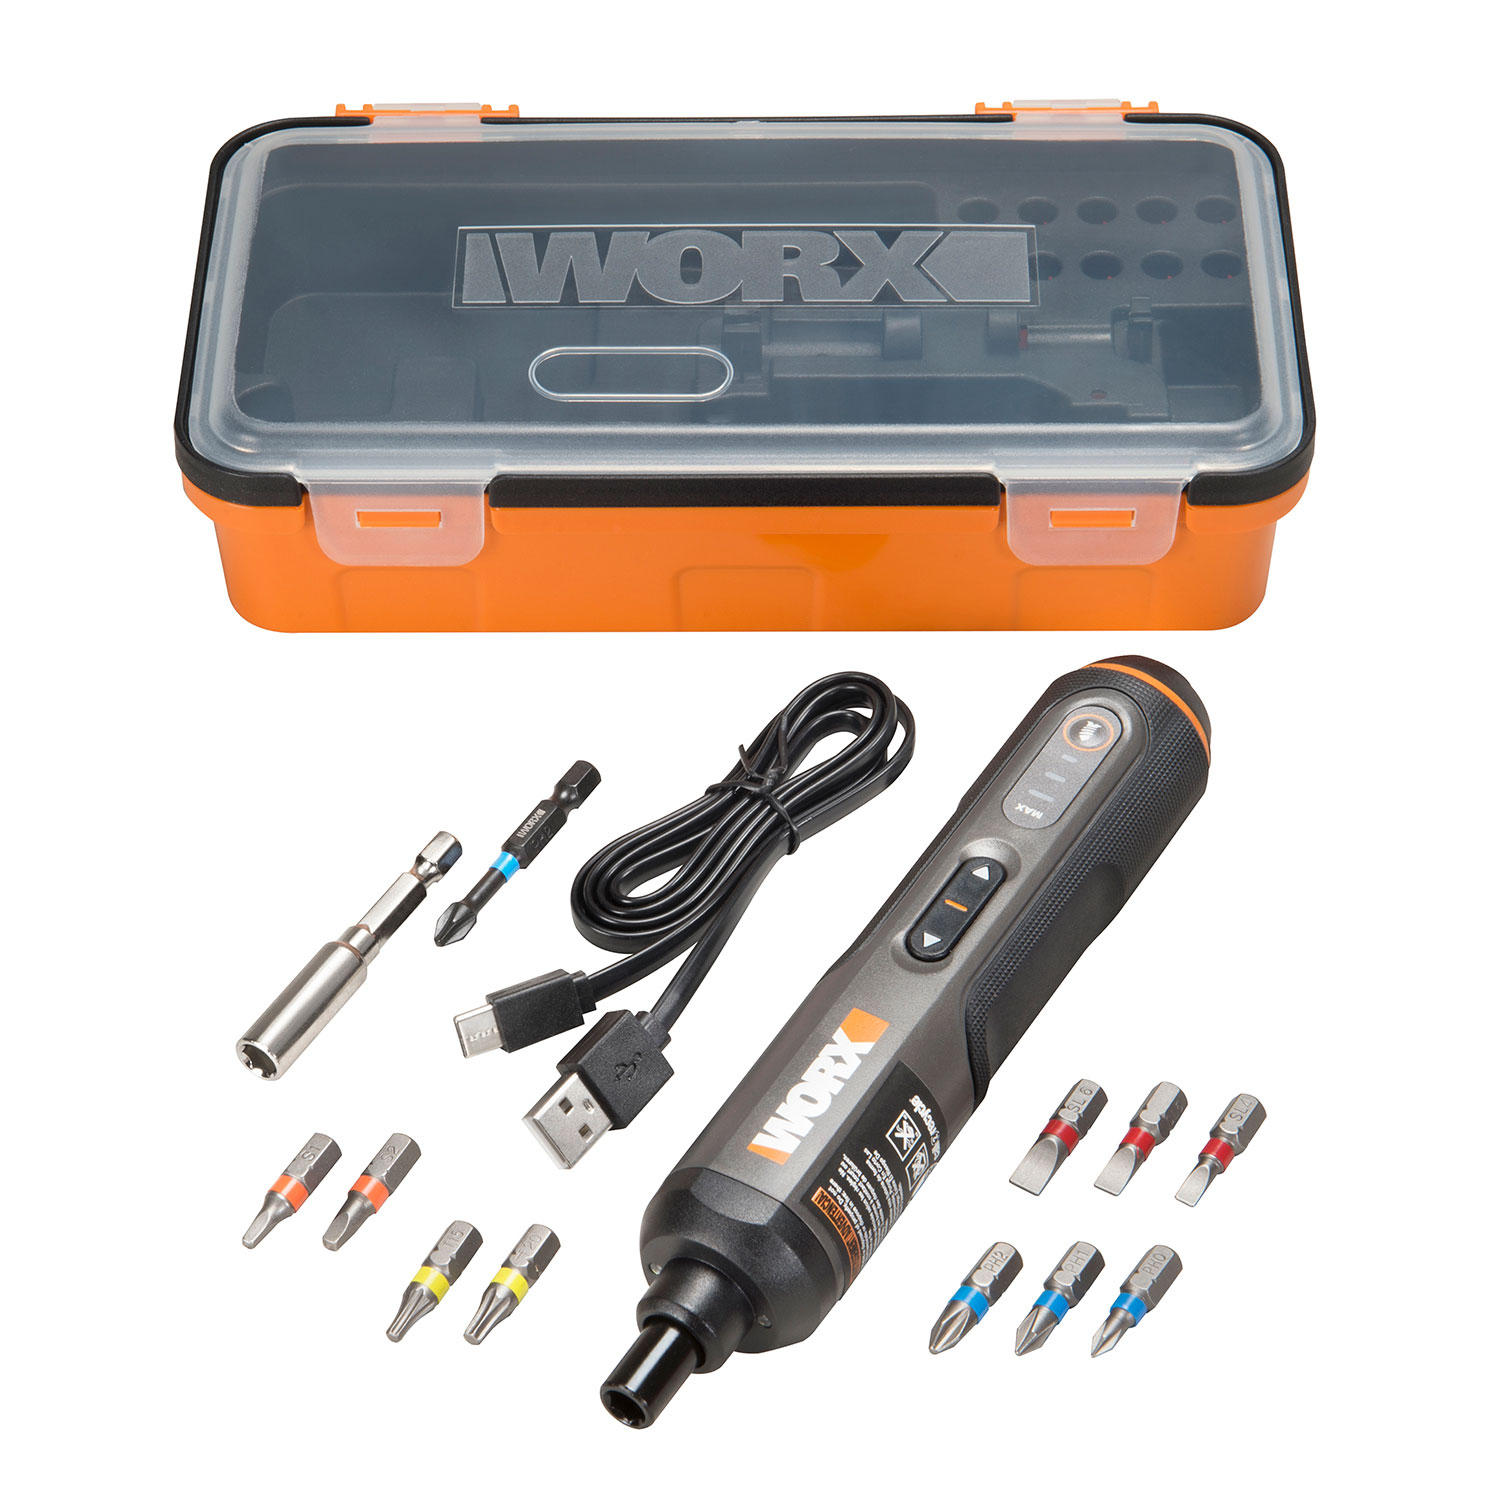 Worx WX240L 4V 3-Speed Cordless Screwdriver with 12 Bits & Case